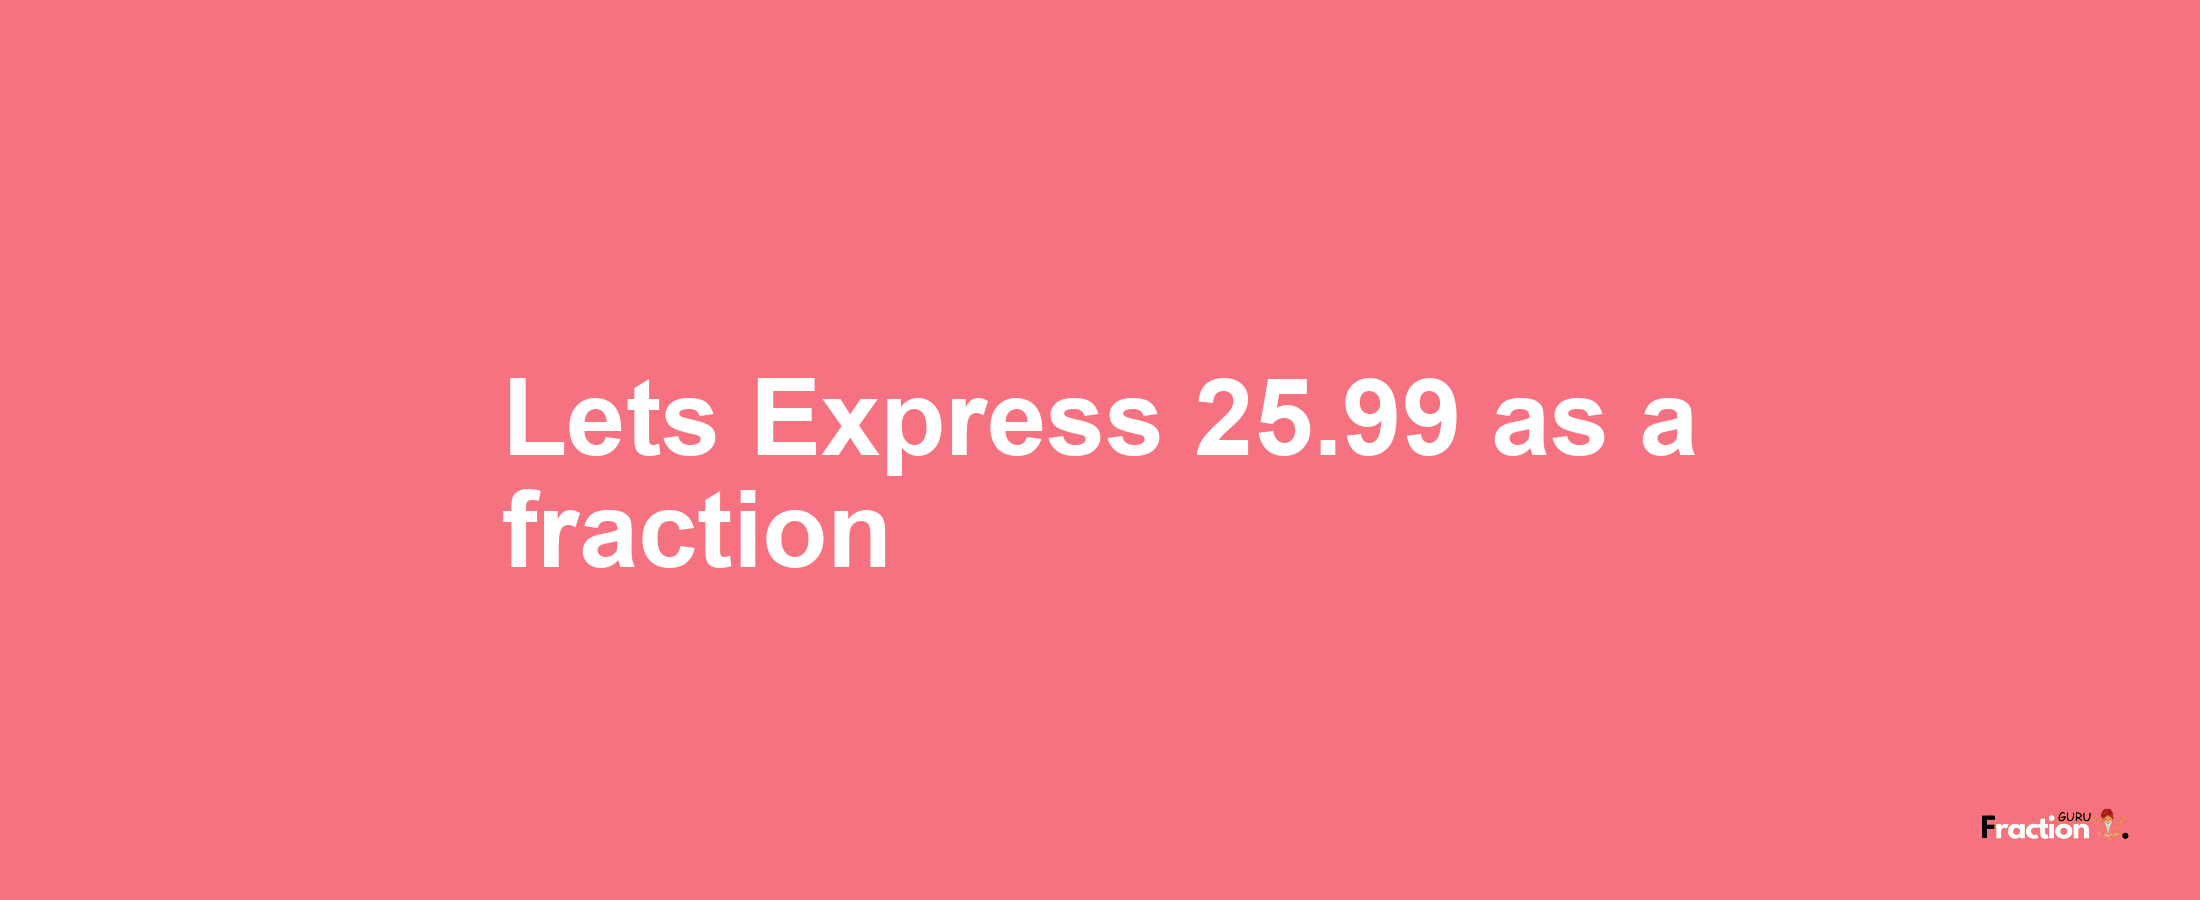 Lets Express 25.99 as afraction